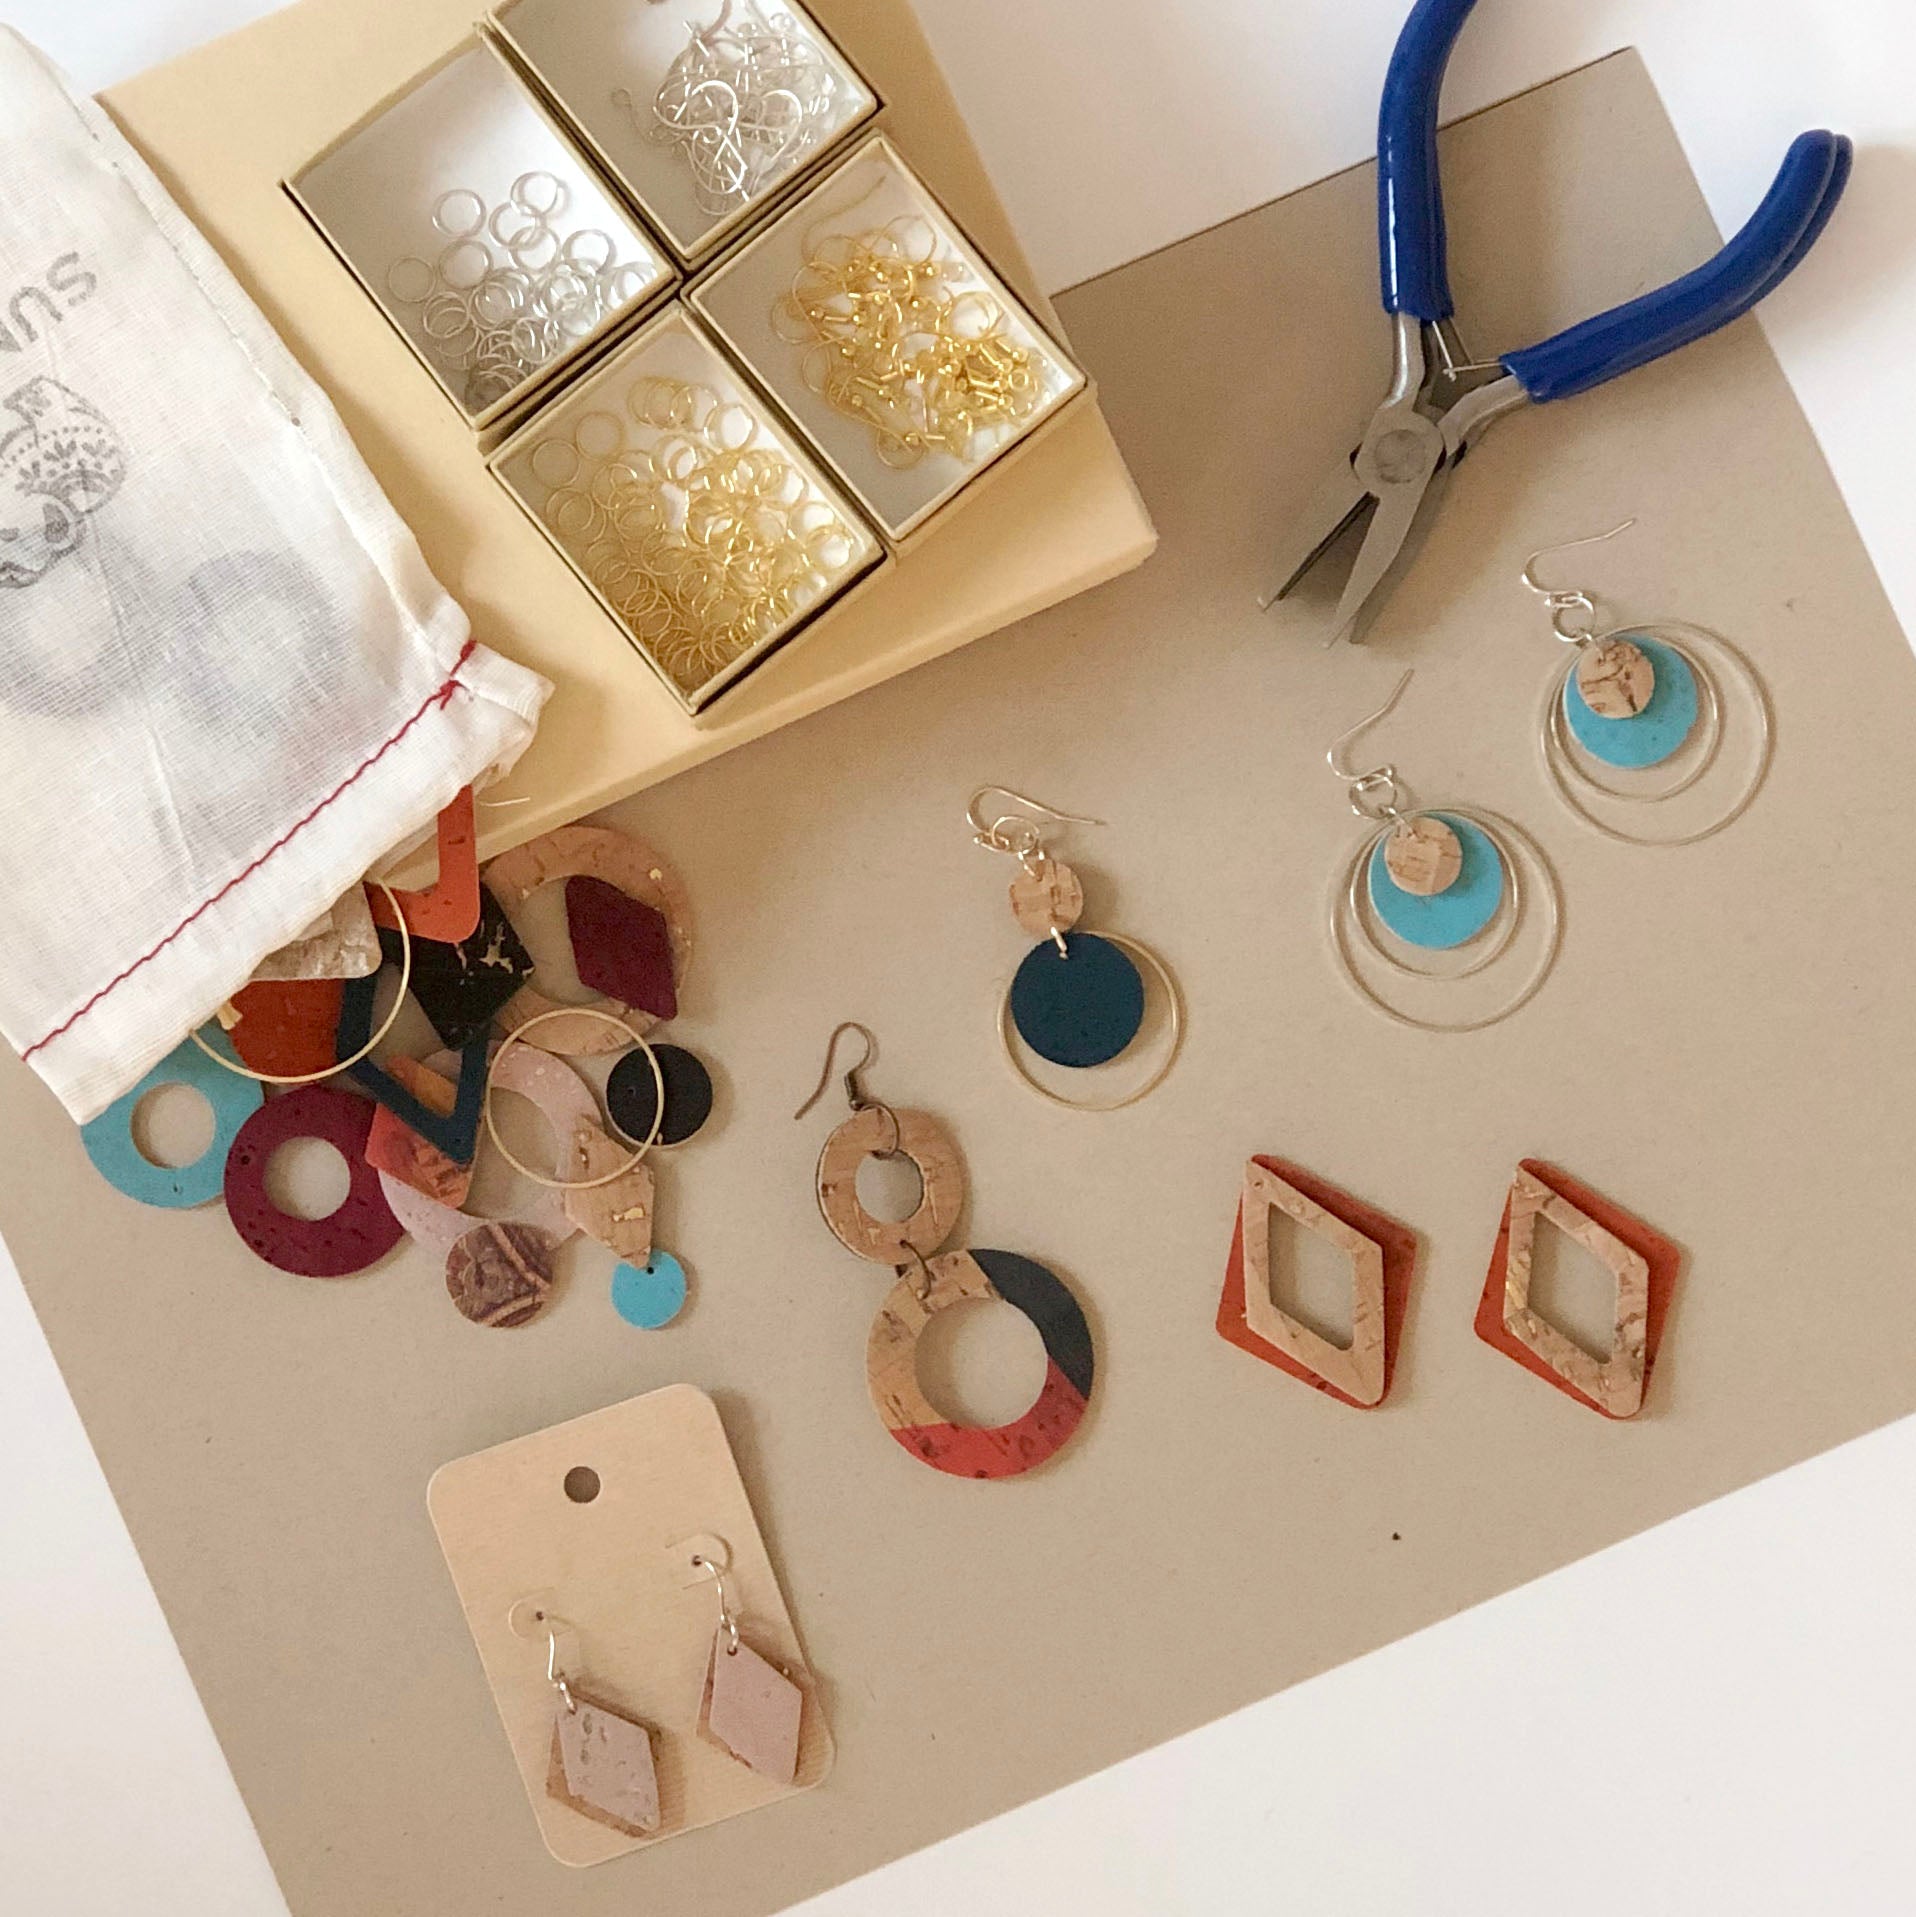 Get DIY Jewelry Making Kit for Beginners & Adults